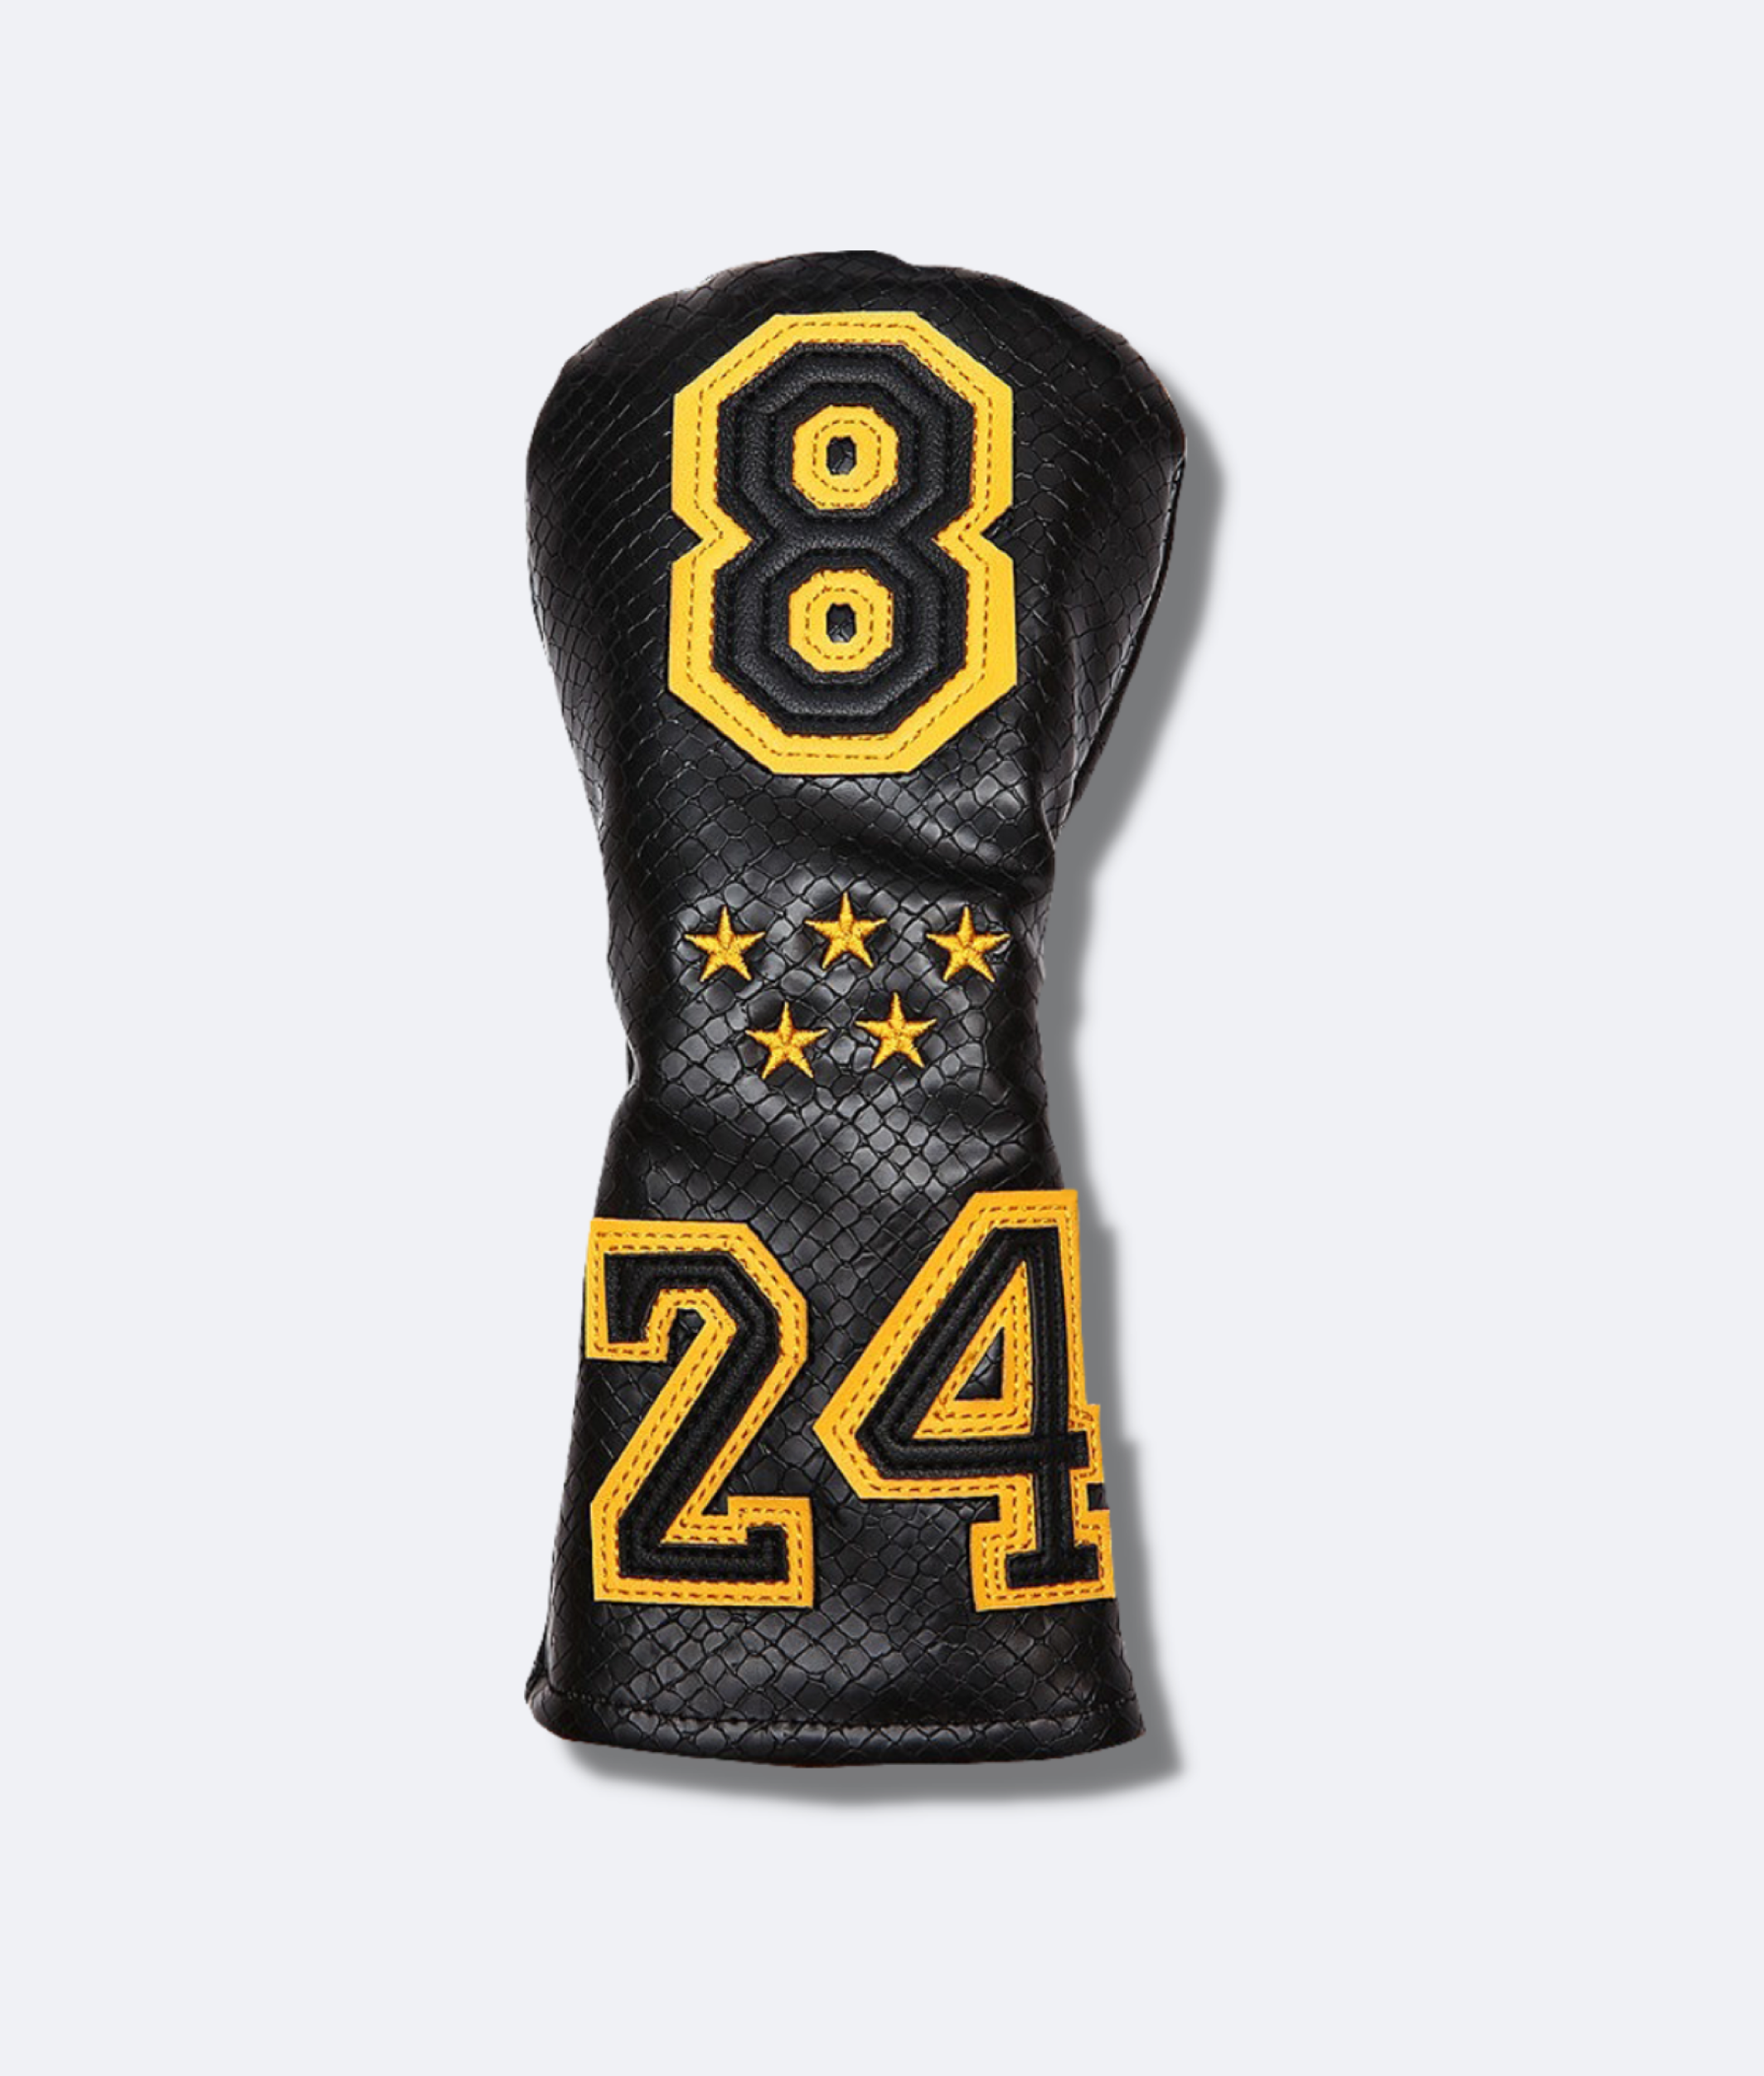 G.O.A.T Bryant 24/8 Headcover